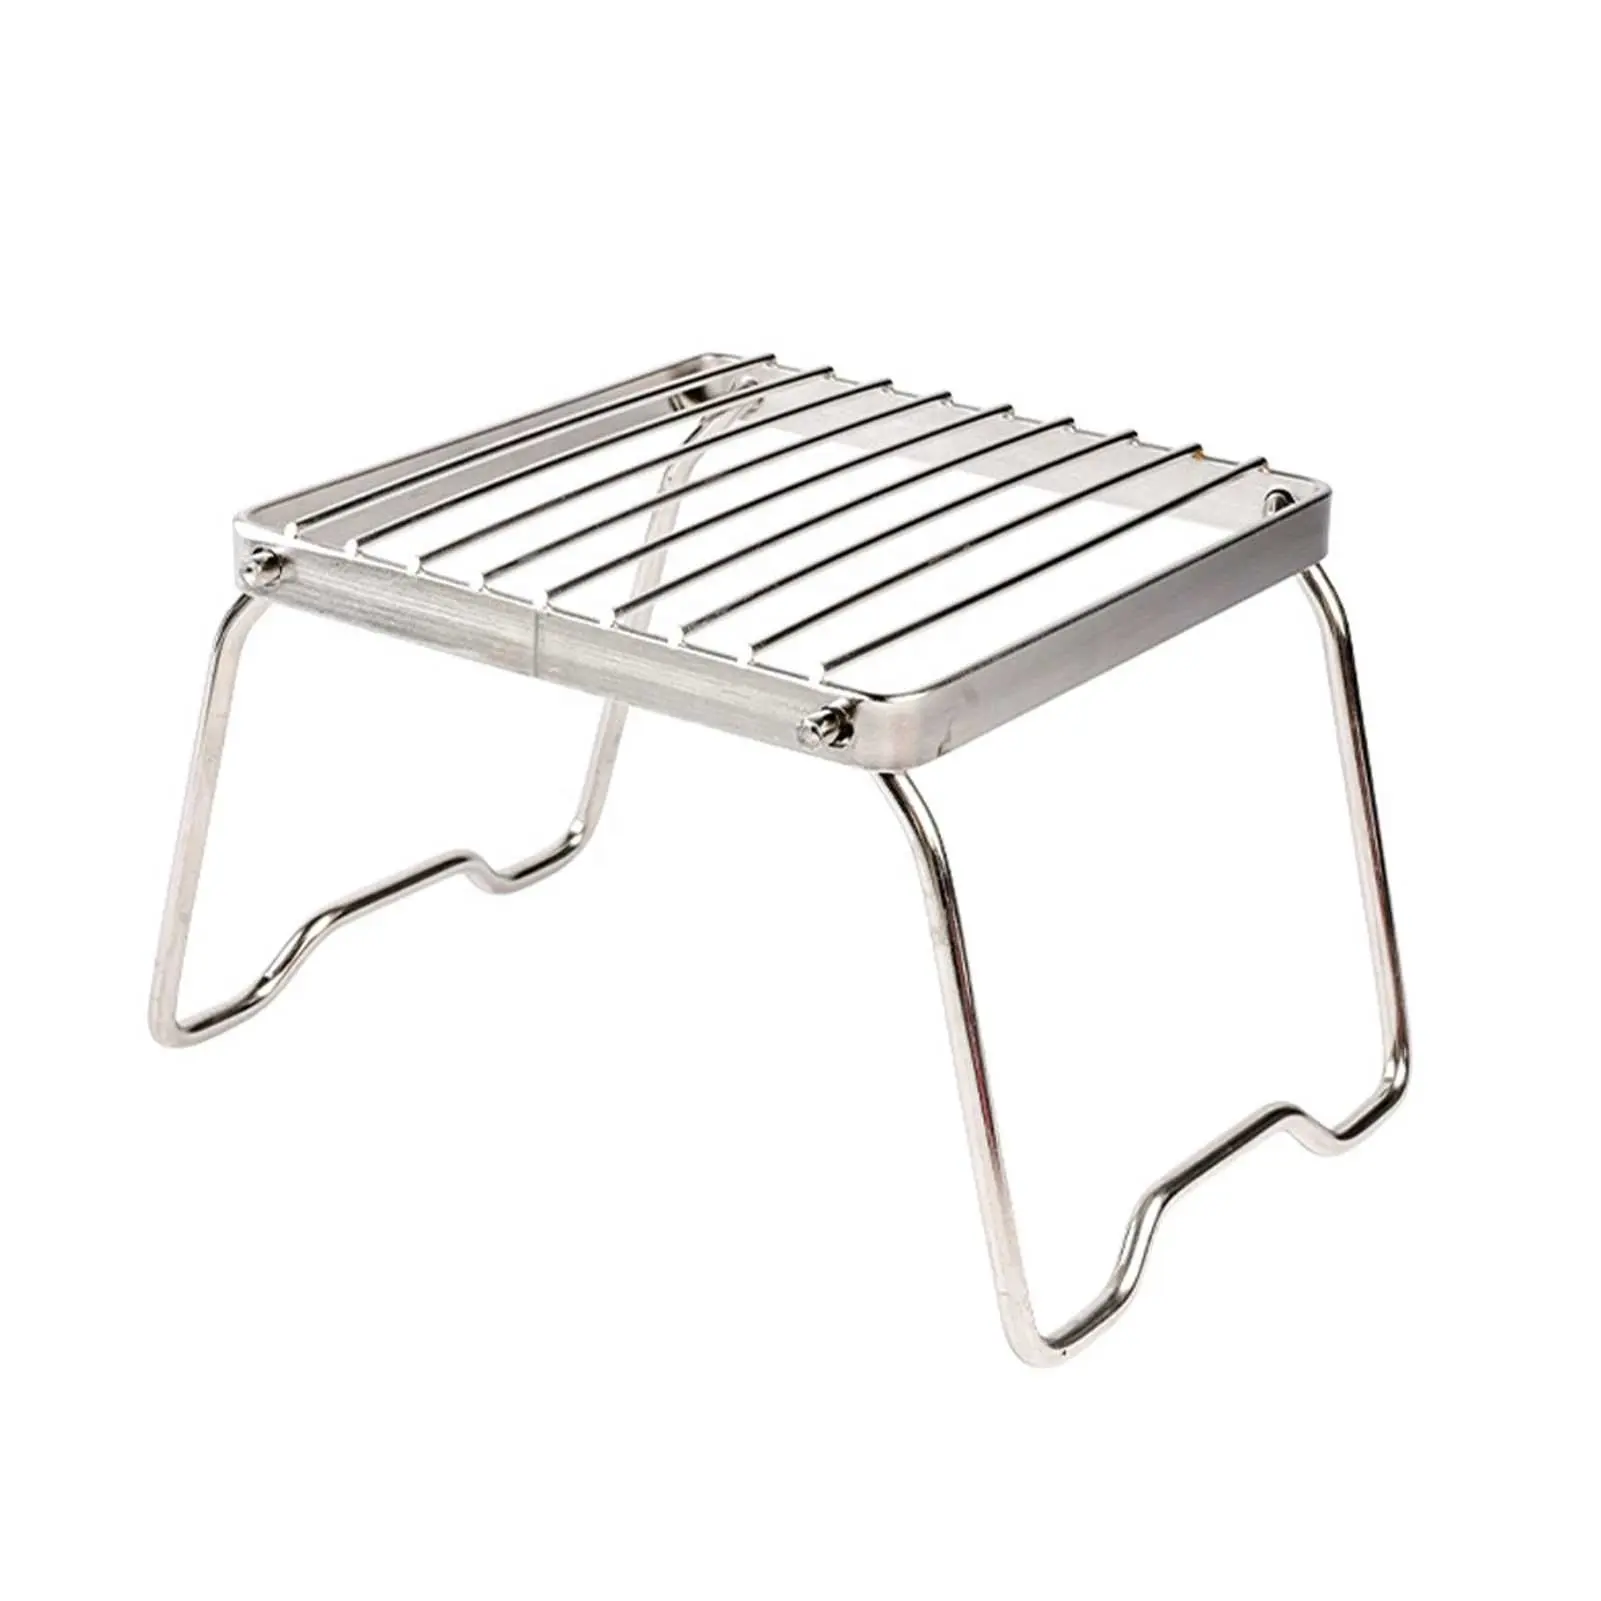 Foldable Portable Camping Grill Stainless Steel Outdoor Picnic Stand Safe BBQ Rack Portable Stable Design Cooking Party Gift